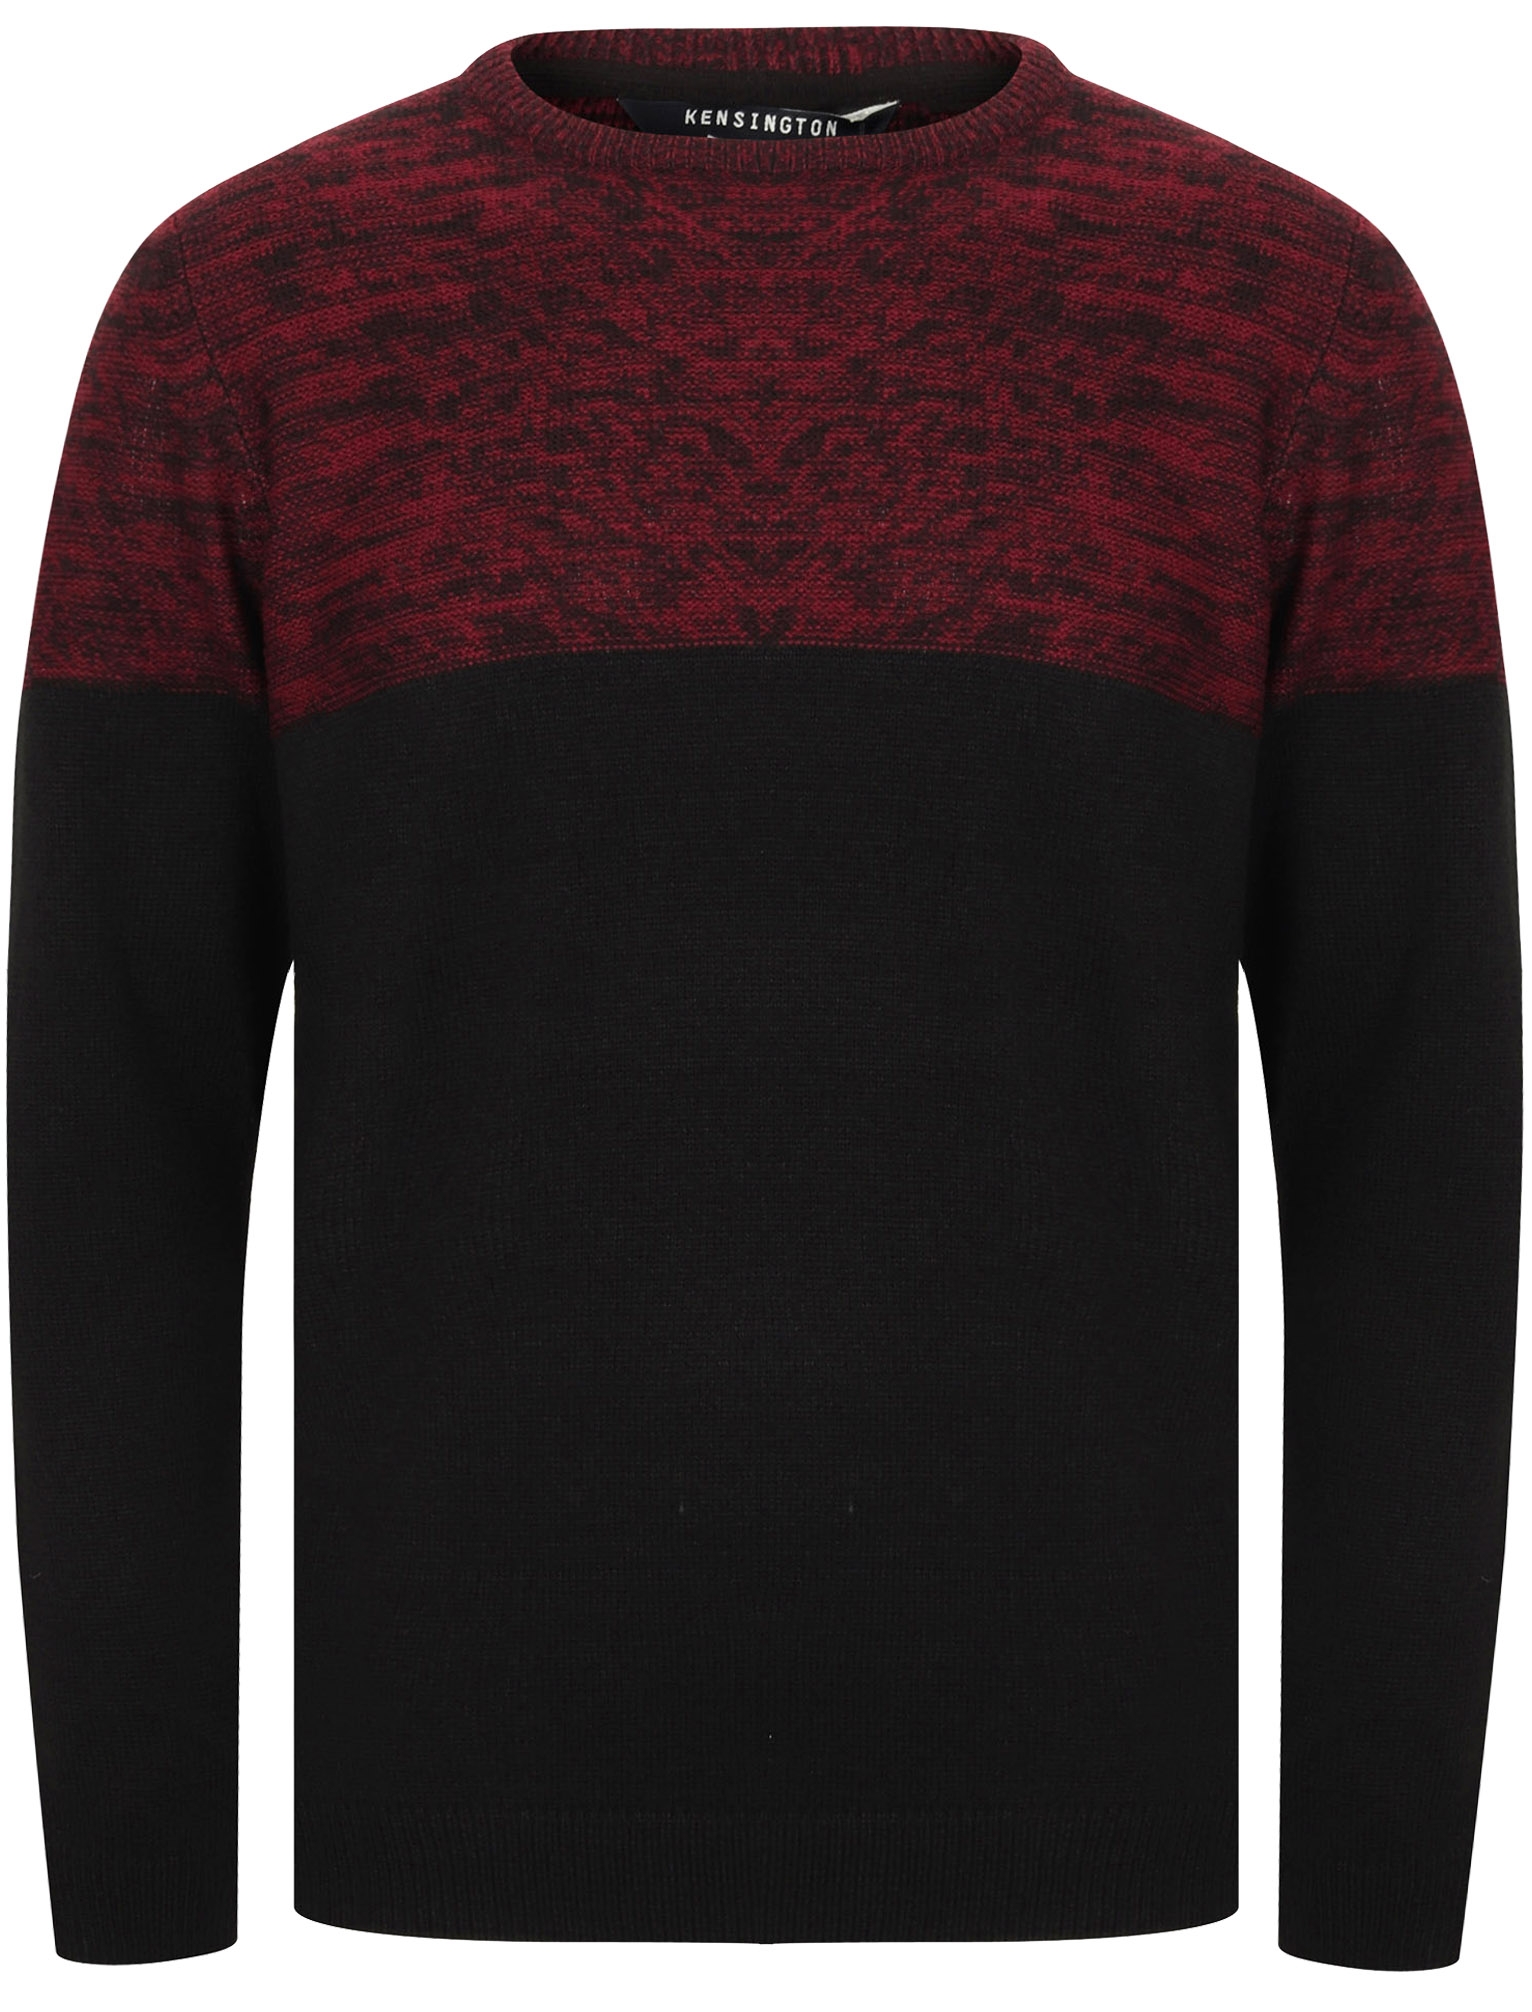 mens knitted jumper acrylic pullover winter top sweater by Kensington Eastside